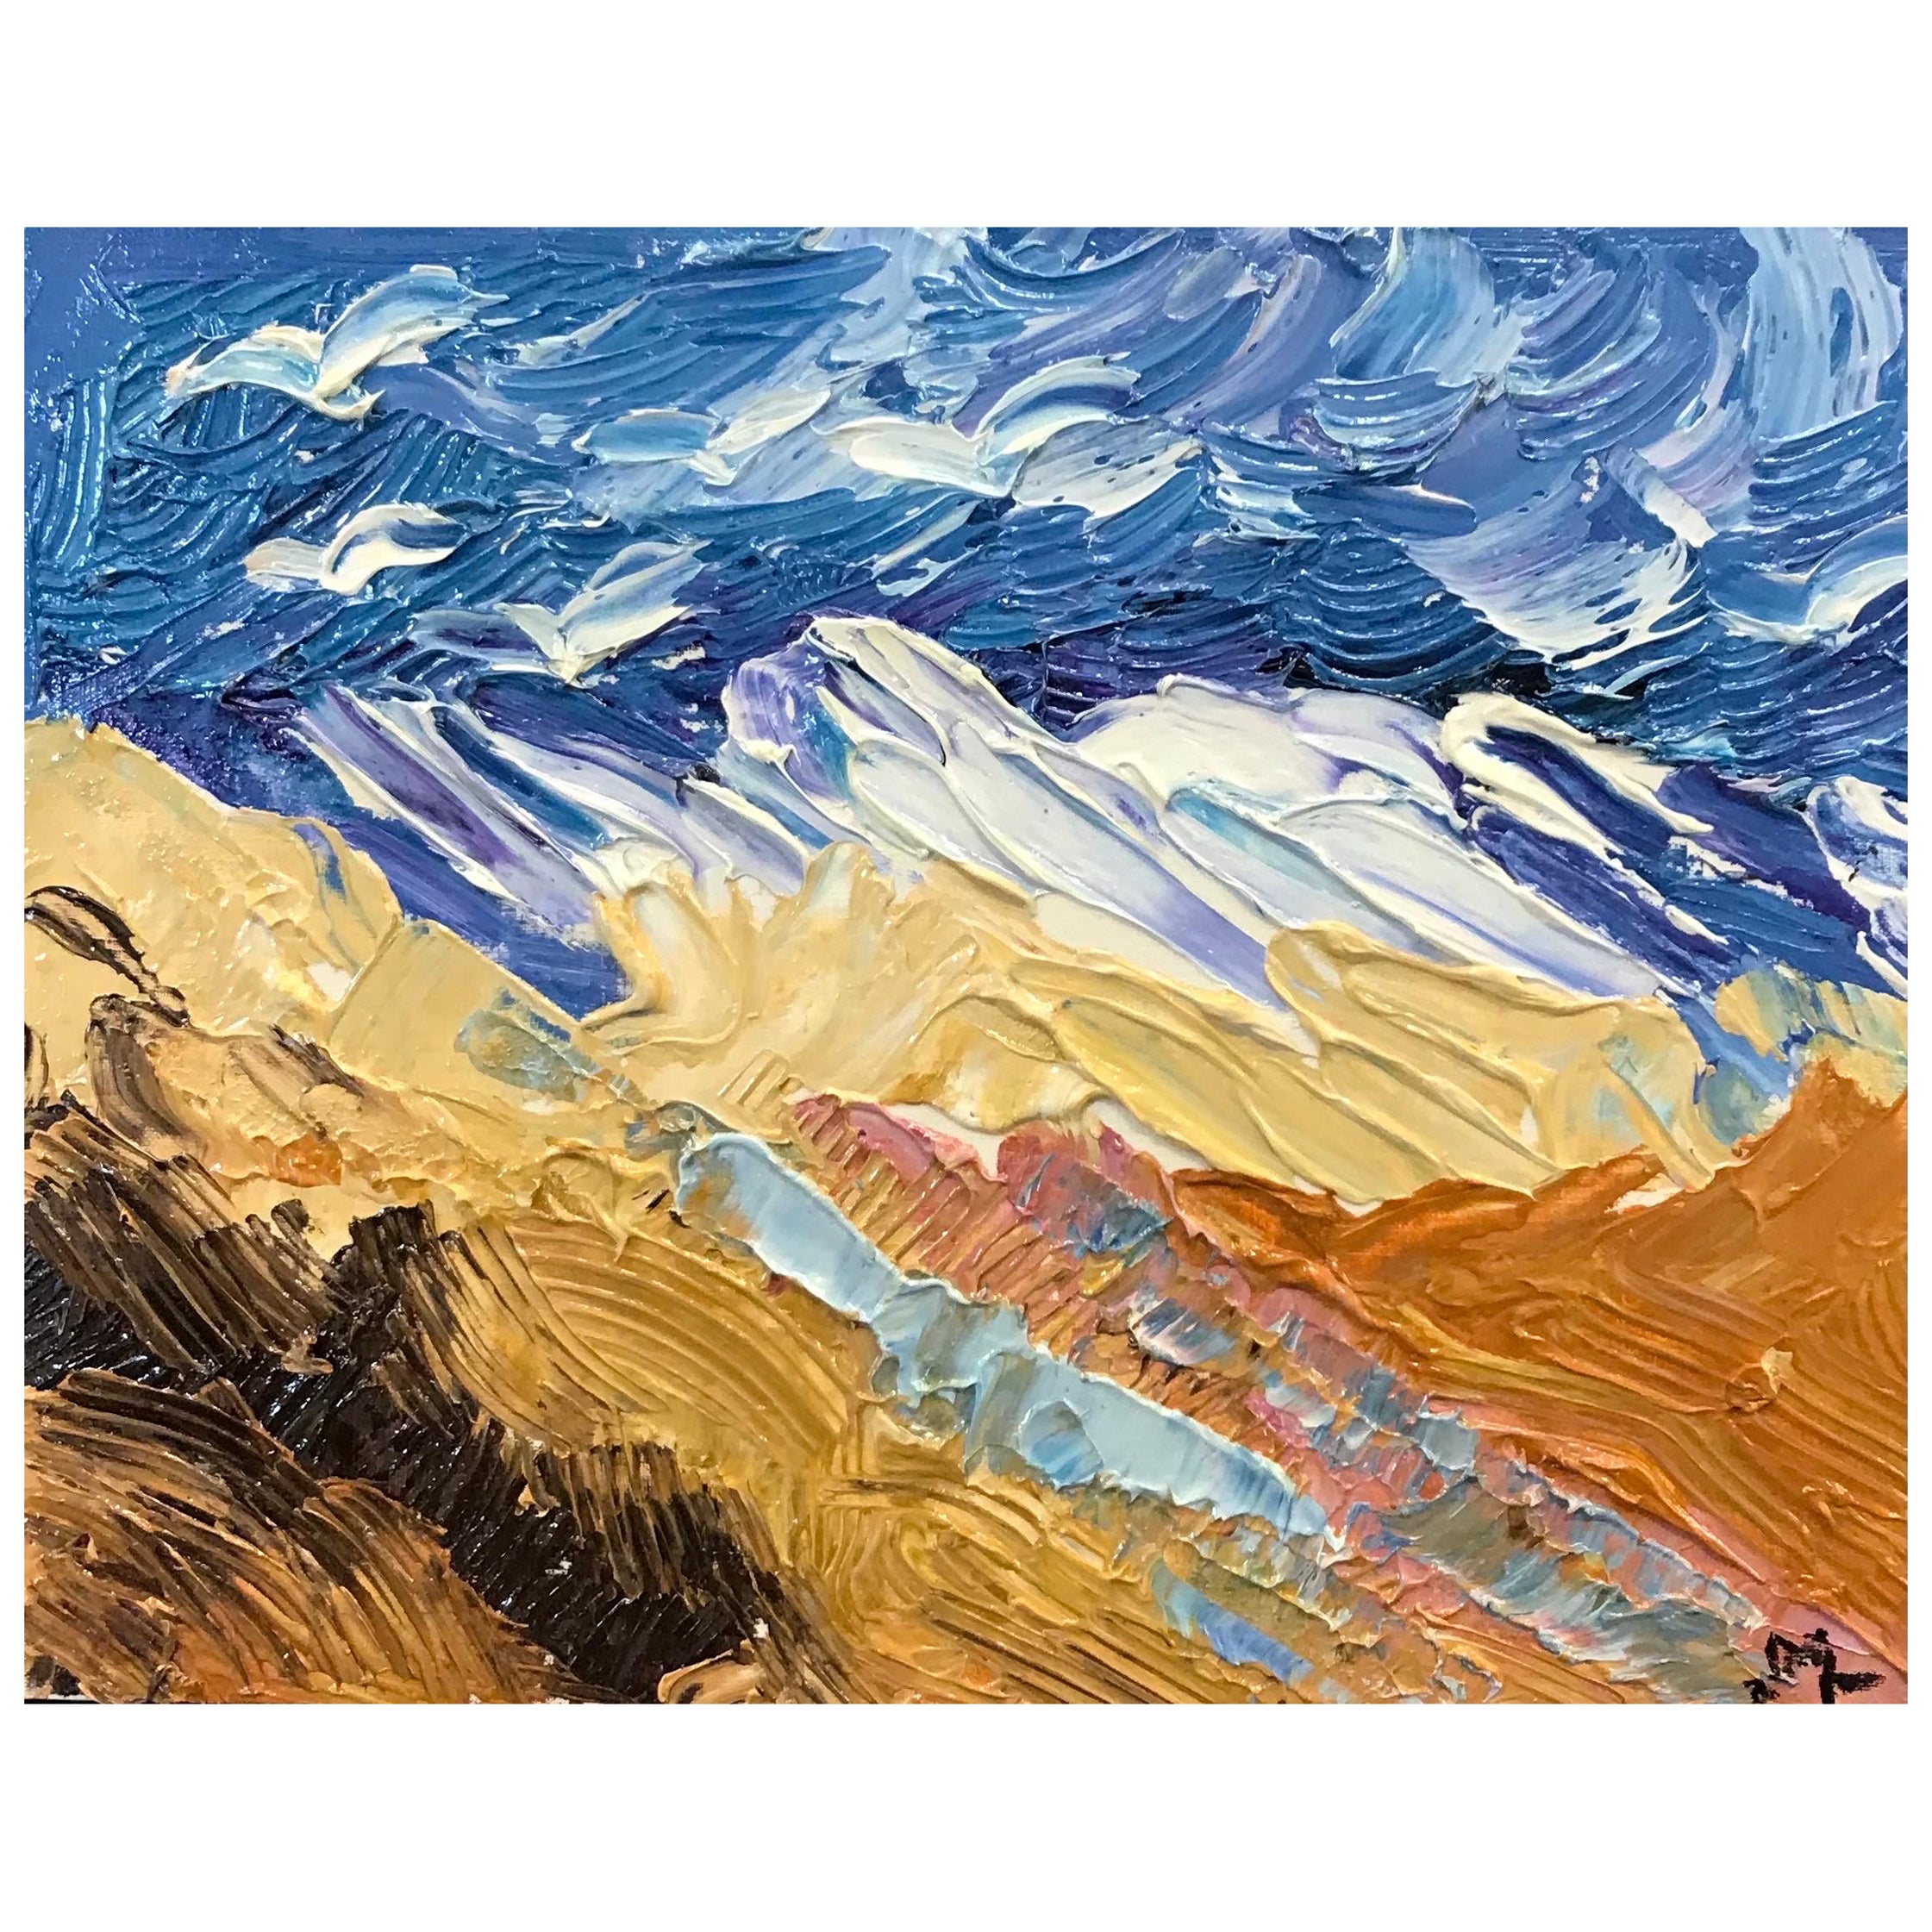 Bright & Colorful French Impressionist Oil Painting, Seagulls Over Mountains For Sale